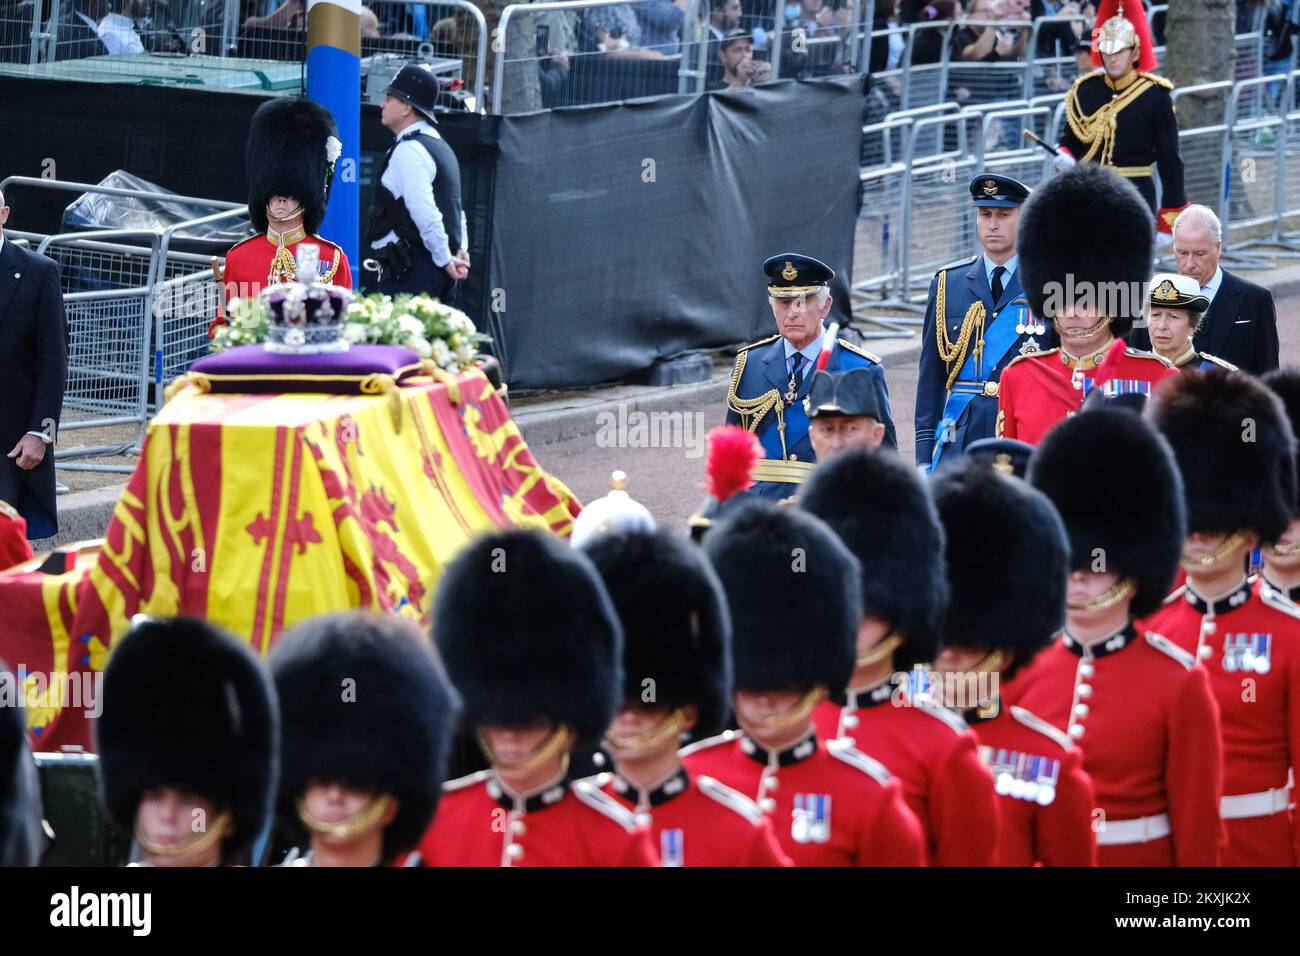 King Charles III walks behind the coffin of his mother, Majesty Queen Elizabeth II followed by his first son, William the Prince of Wales. photographed during The ceremonial procession to transport her late Majesty Queen Elizabeth II’s coffin from Buckingham Palace to the Palace of Westminster at The Mall , London on Wednesday 14 September 2022 . Picture by Julie Edwards. Stock Photo